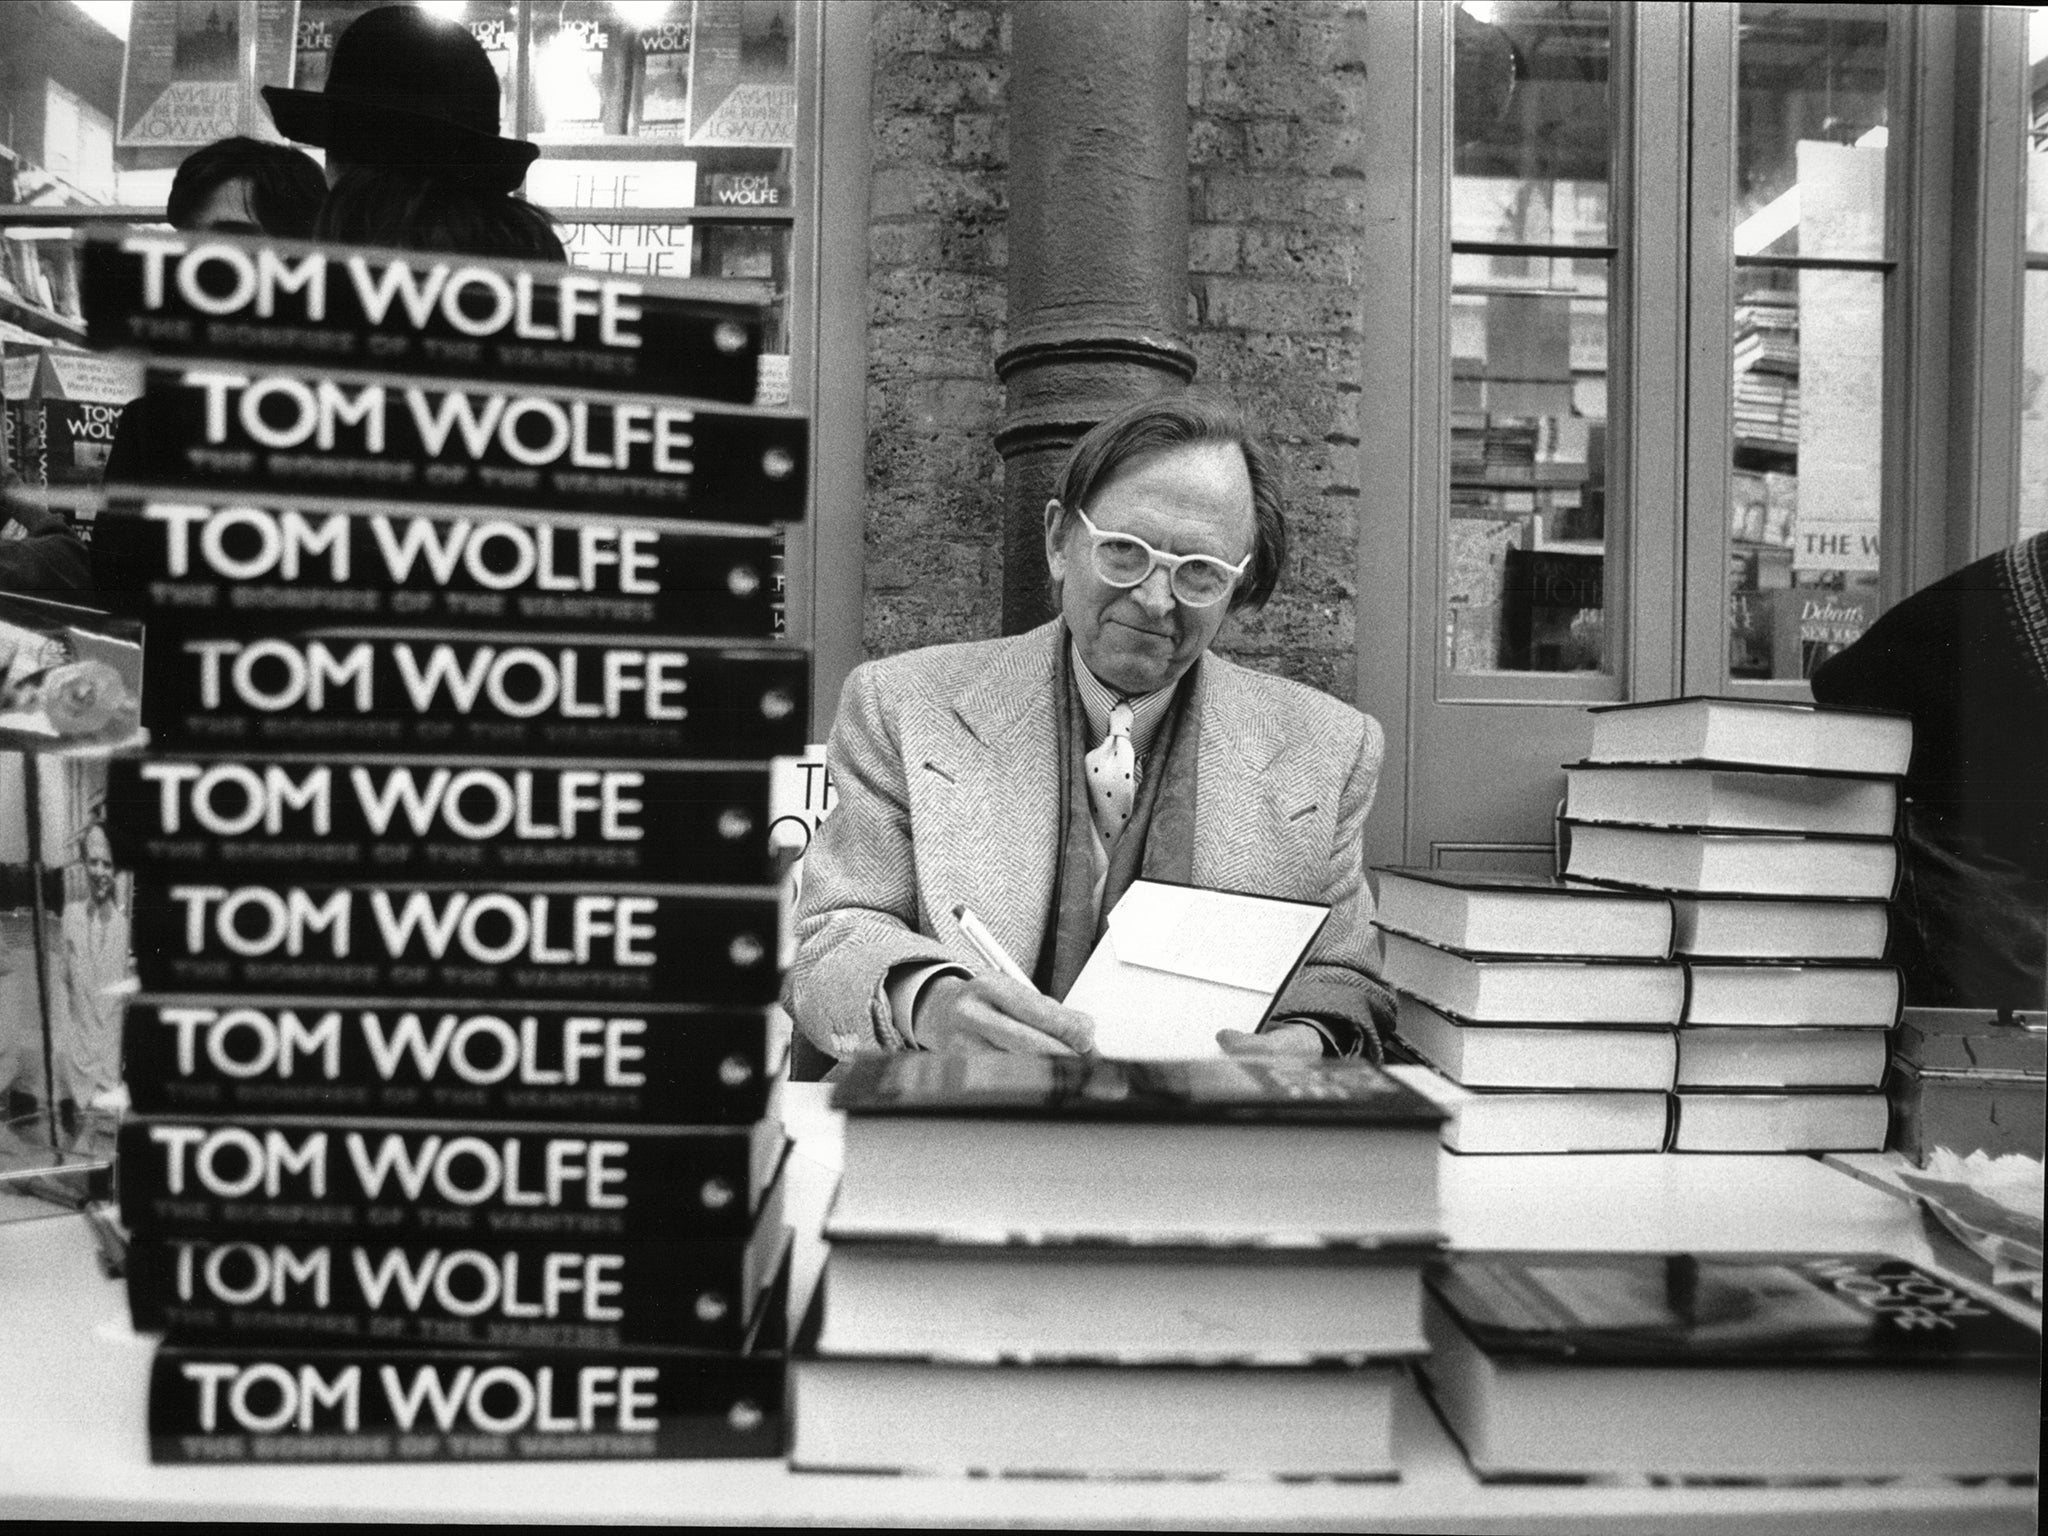 Wolfe in 1988. His novel ‘Bonfire of the Vanities’ sold millions and was made into a 1990 film starring Tom Hanks